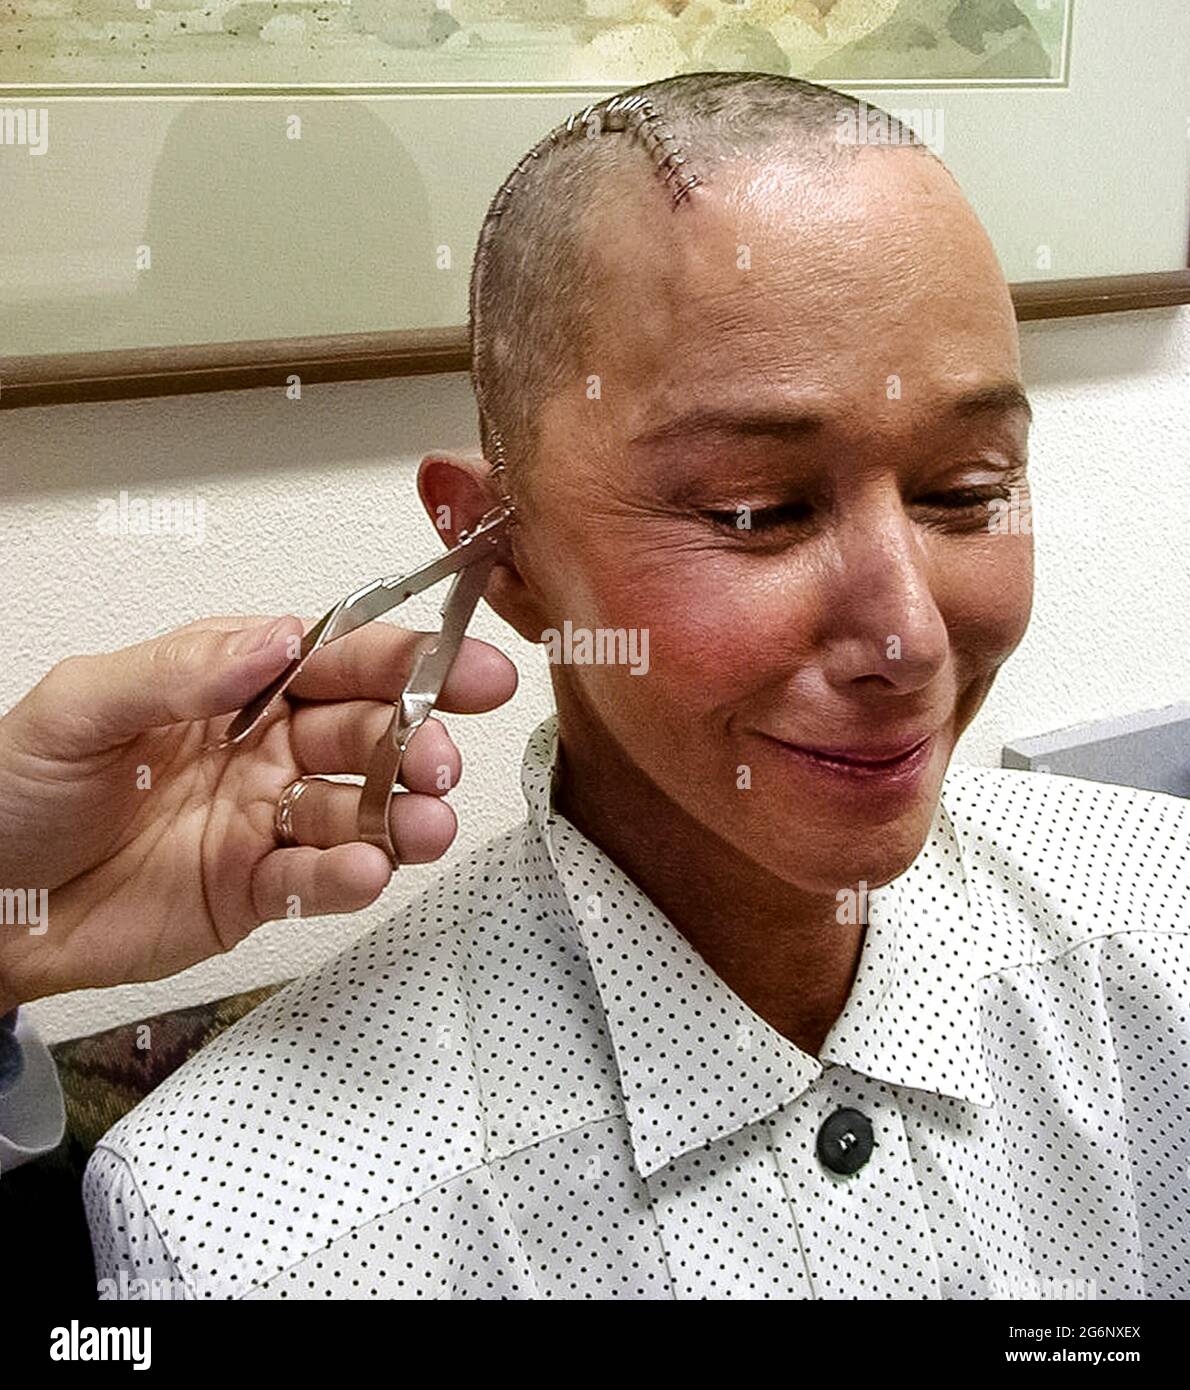 An American woman who suffered from epilepsy smiles as her hair grows back  and a doctor removes the stainless steel staples that were used to close a  large incision in her head